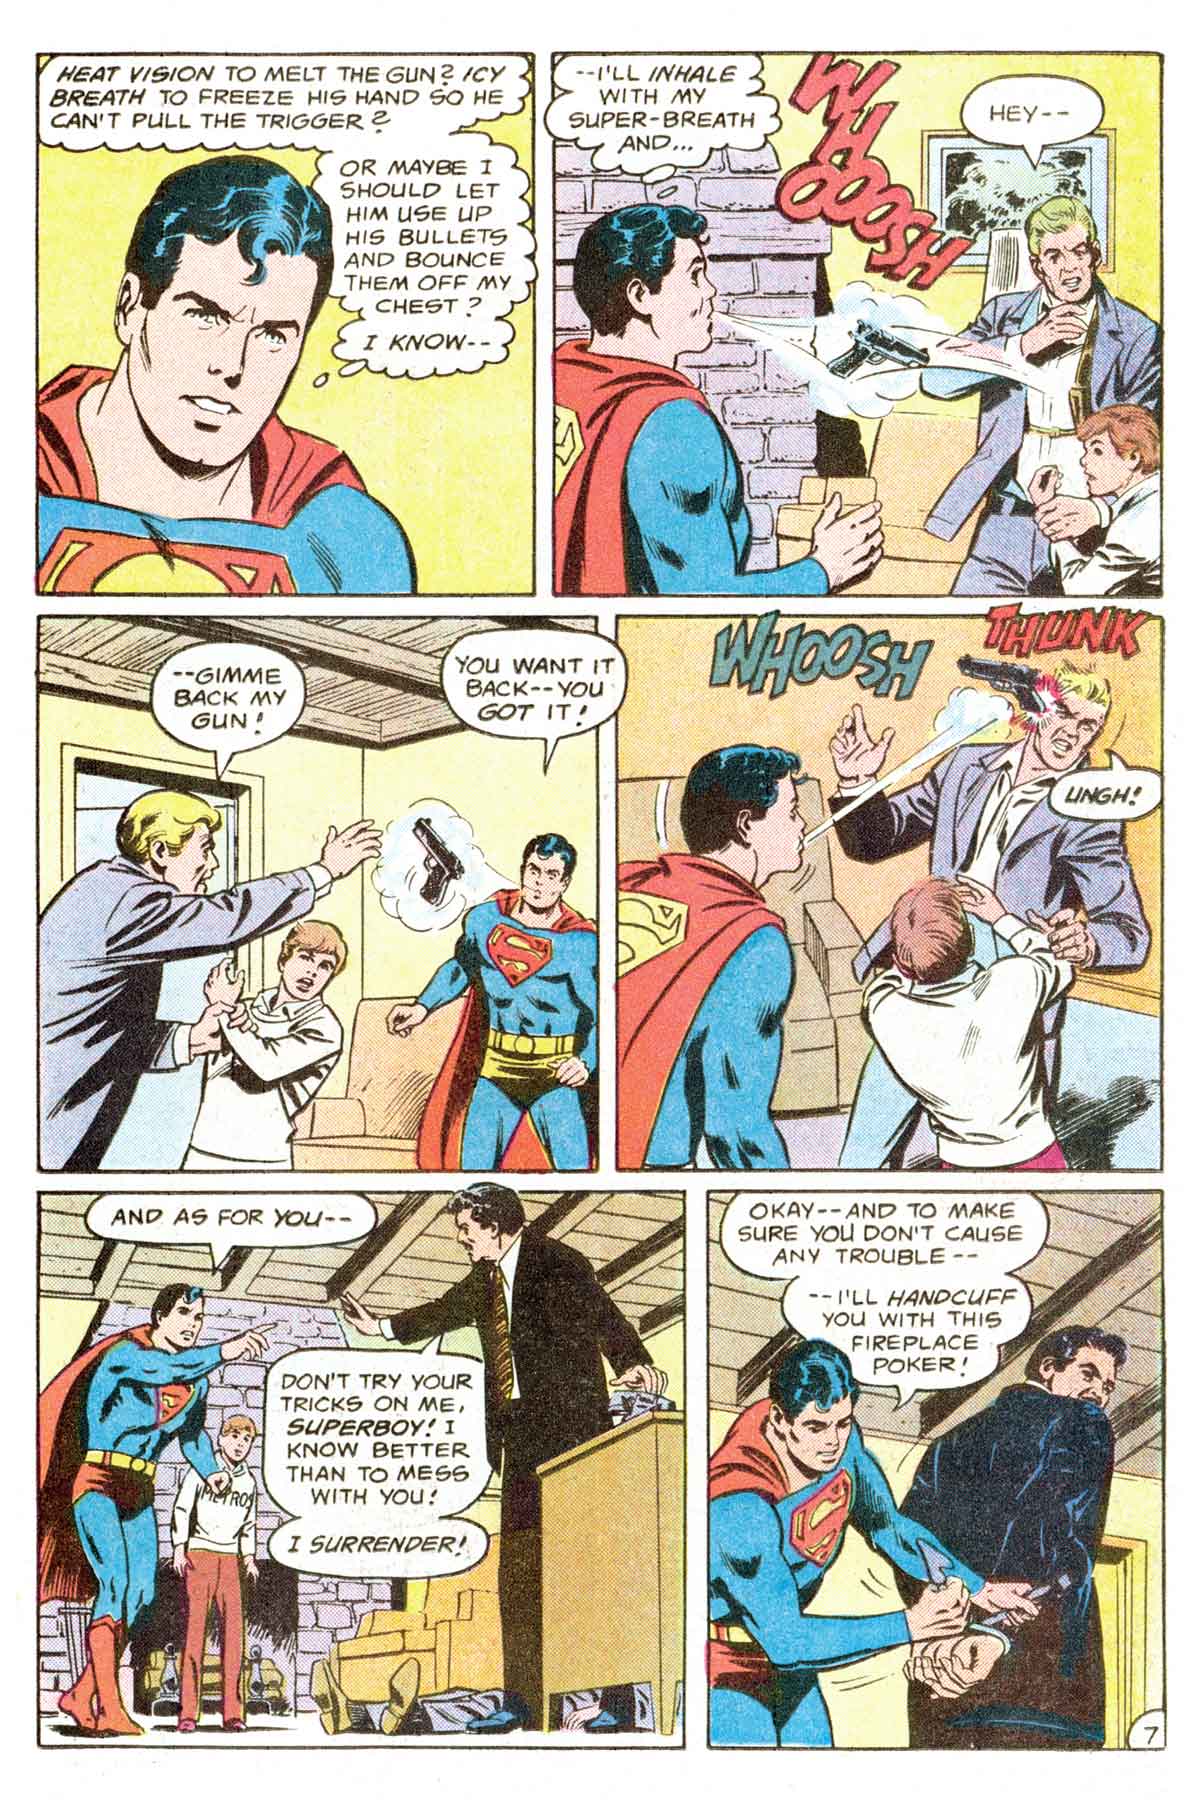 The New Adventures of Superboy 51 Page 7